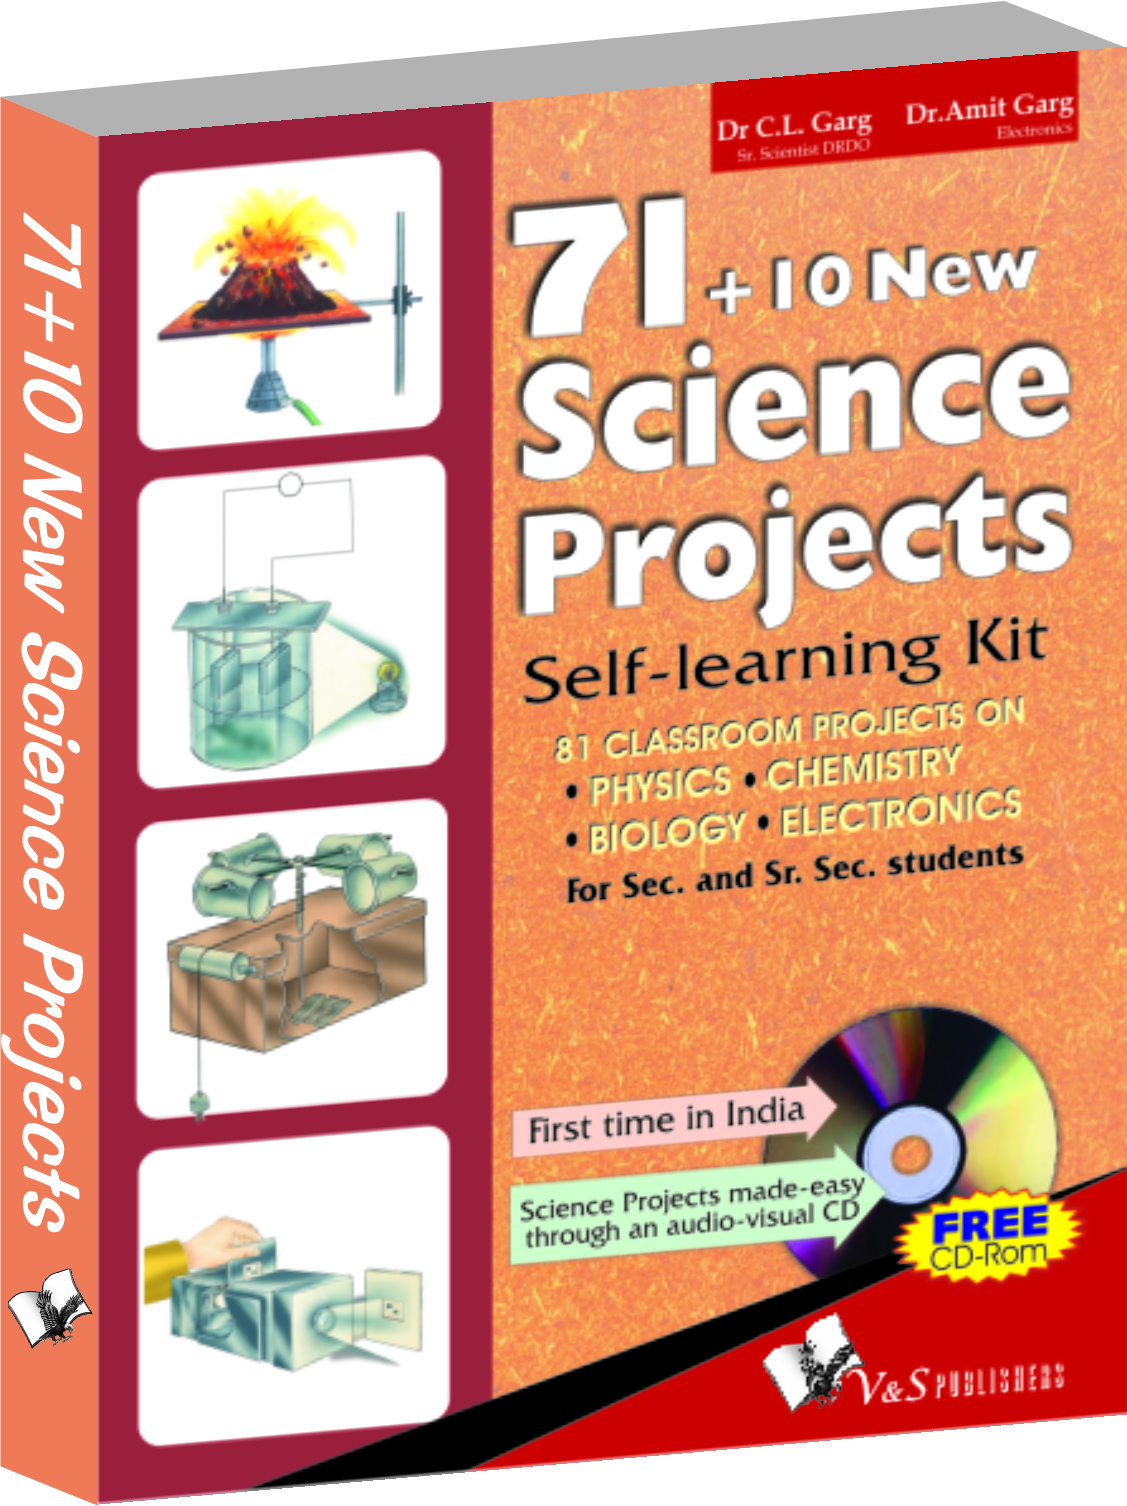 71+10 New Science Projects   (With Online Content on  Dropbox)-Self learning kit